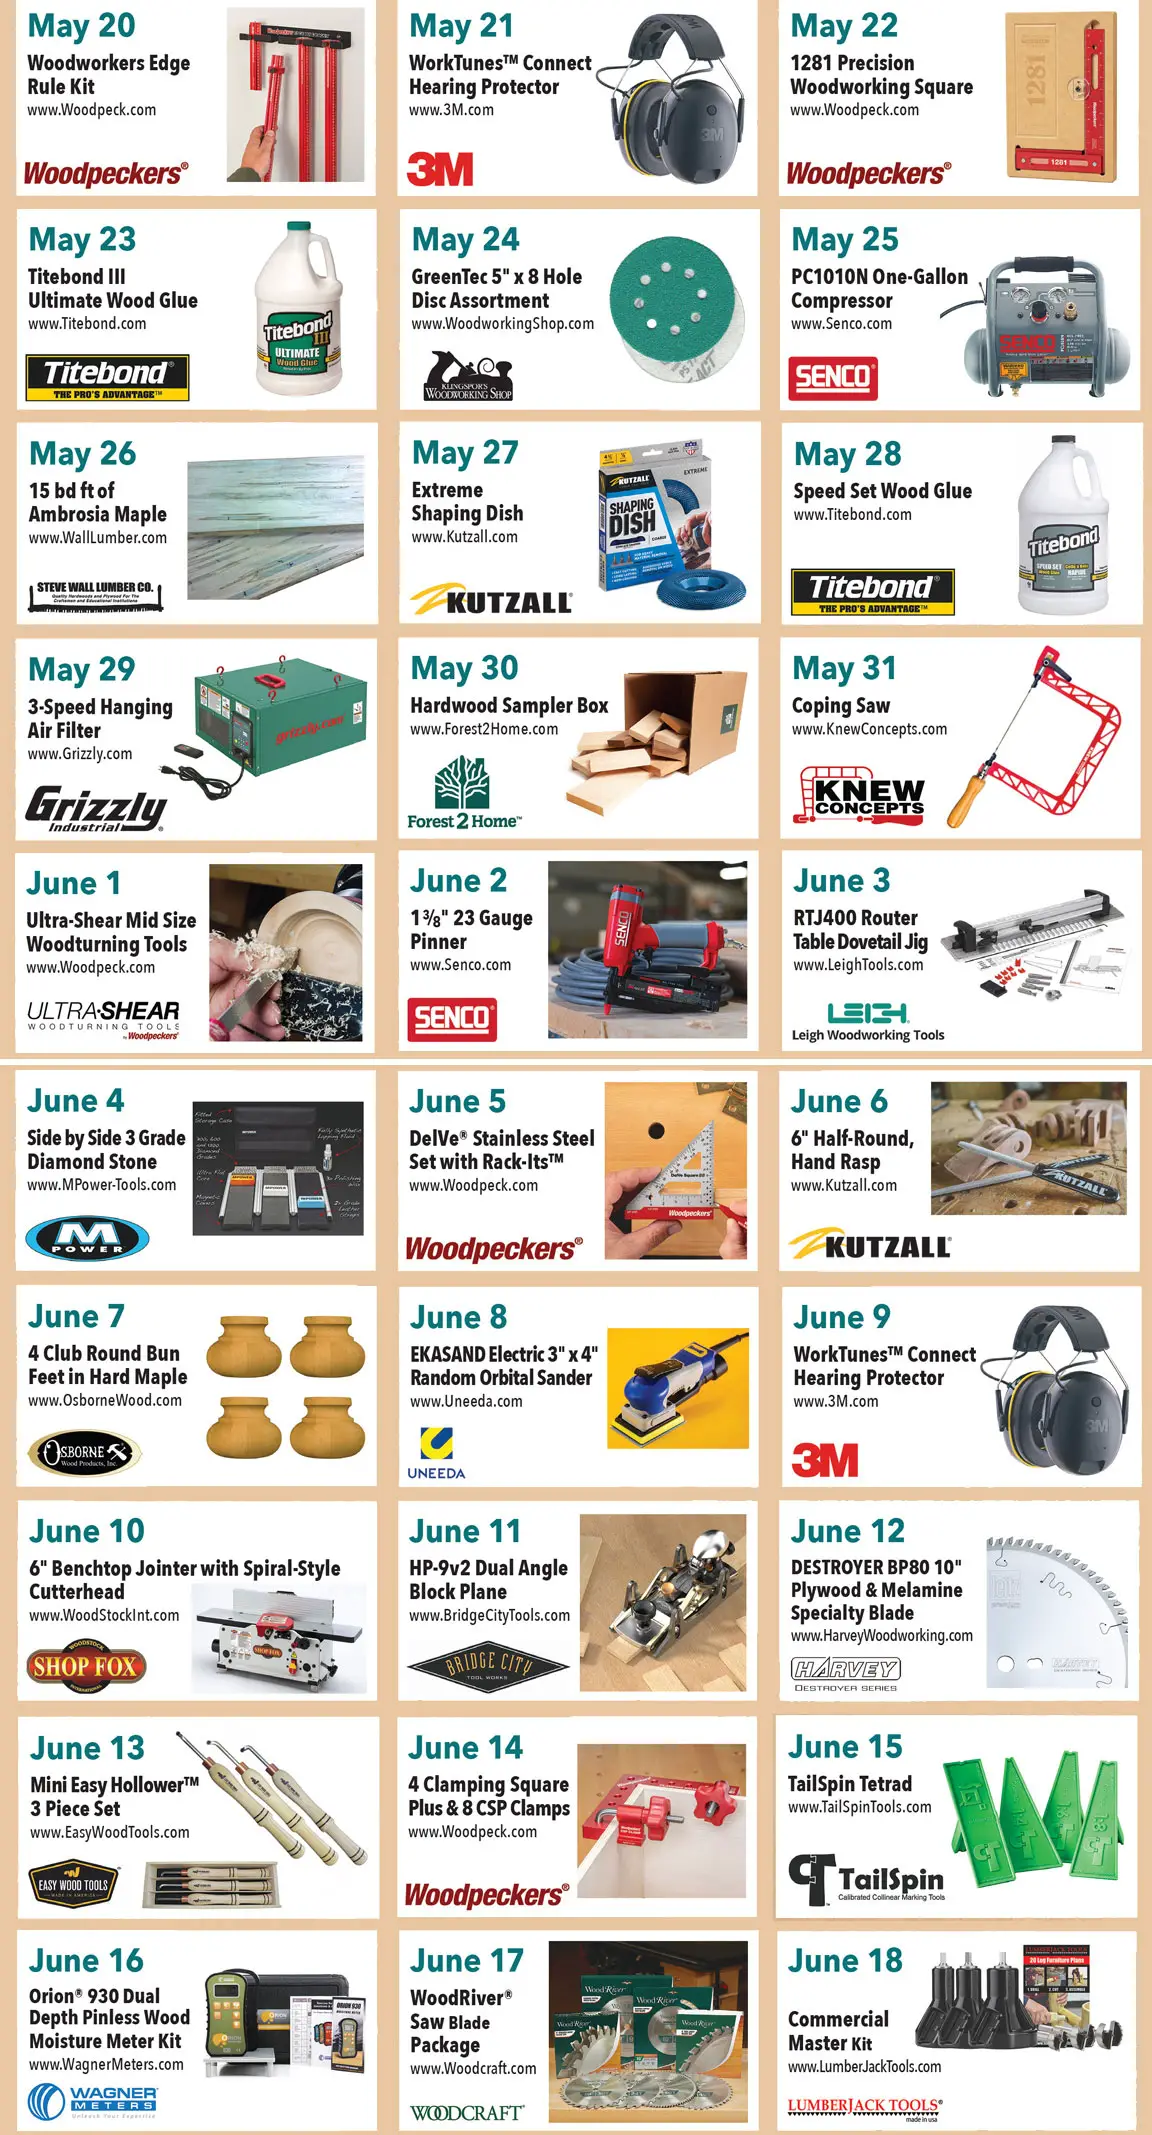 Popular Woodworking 31 Days for Dad Giveaway (Daily Prizes)